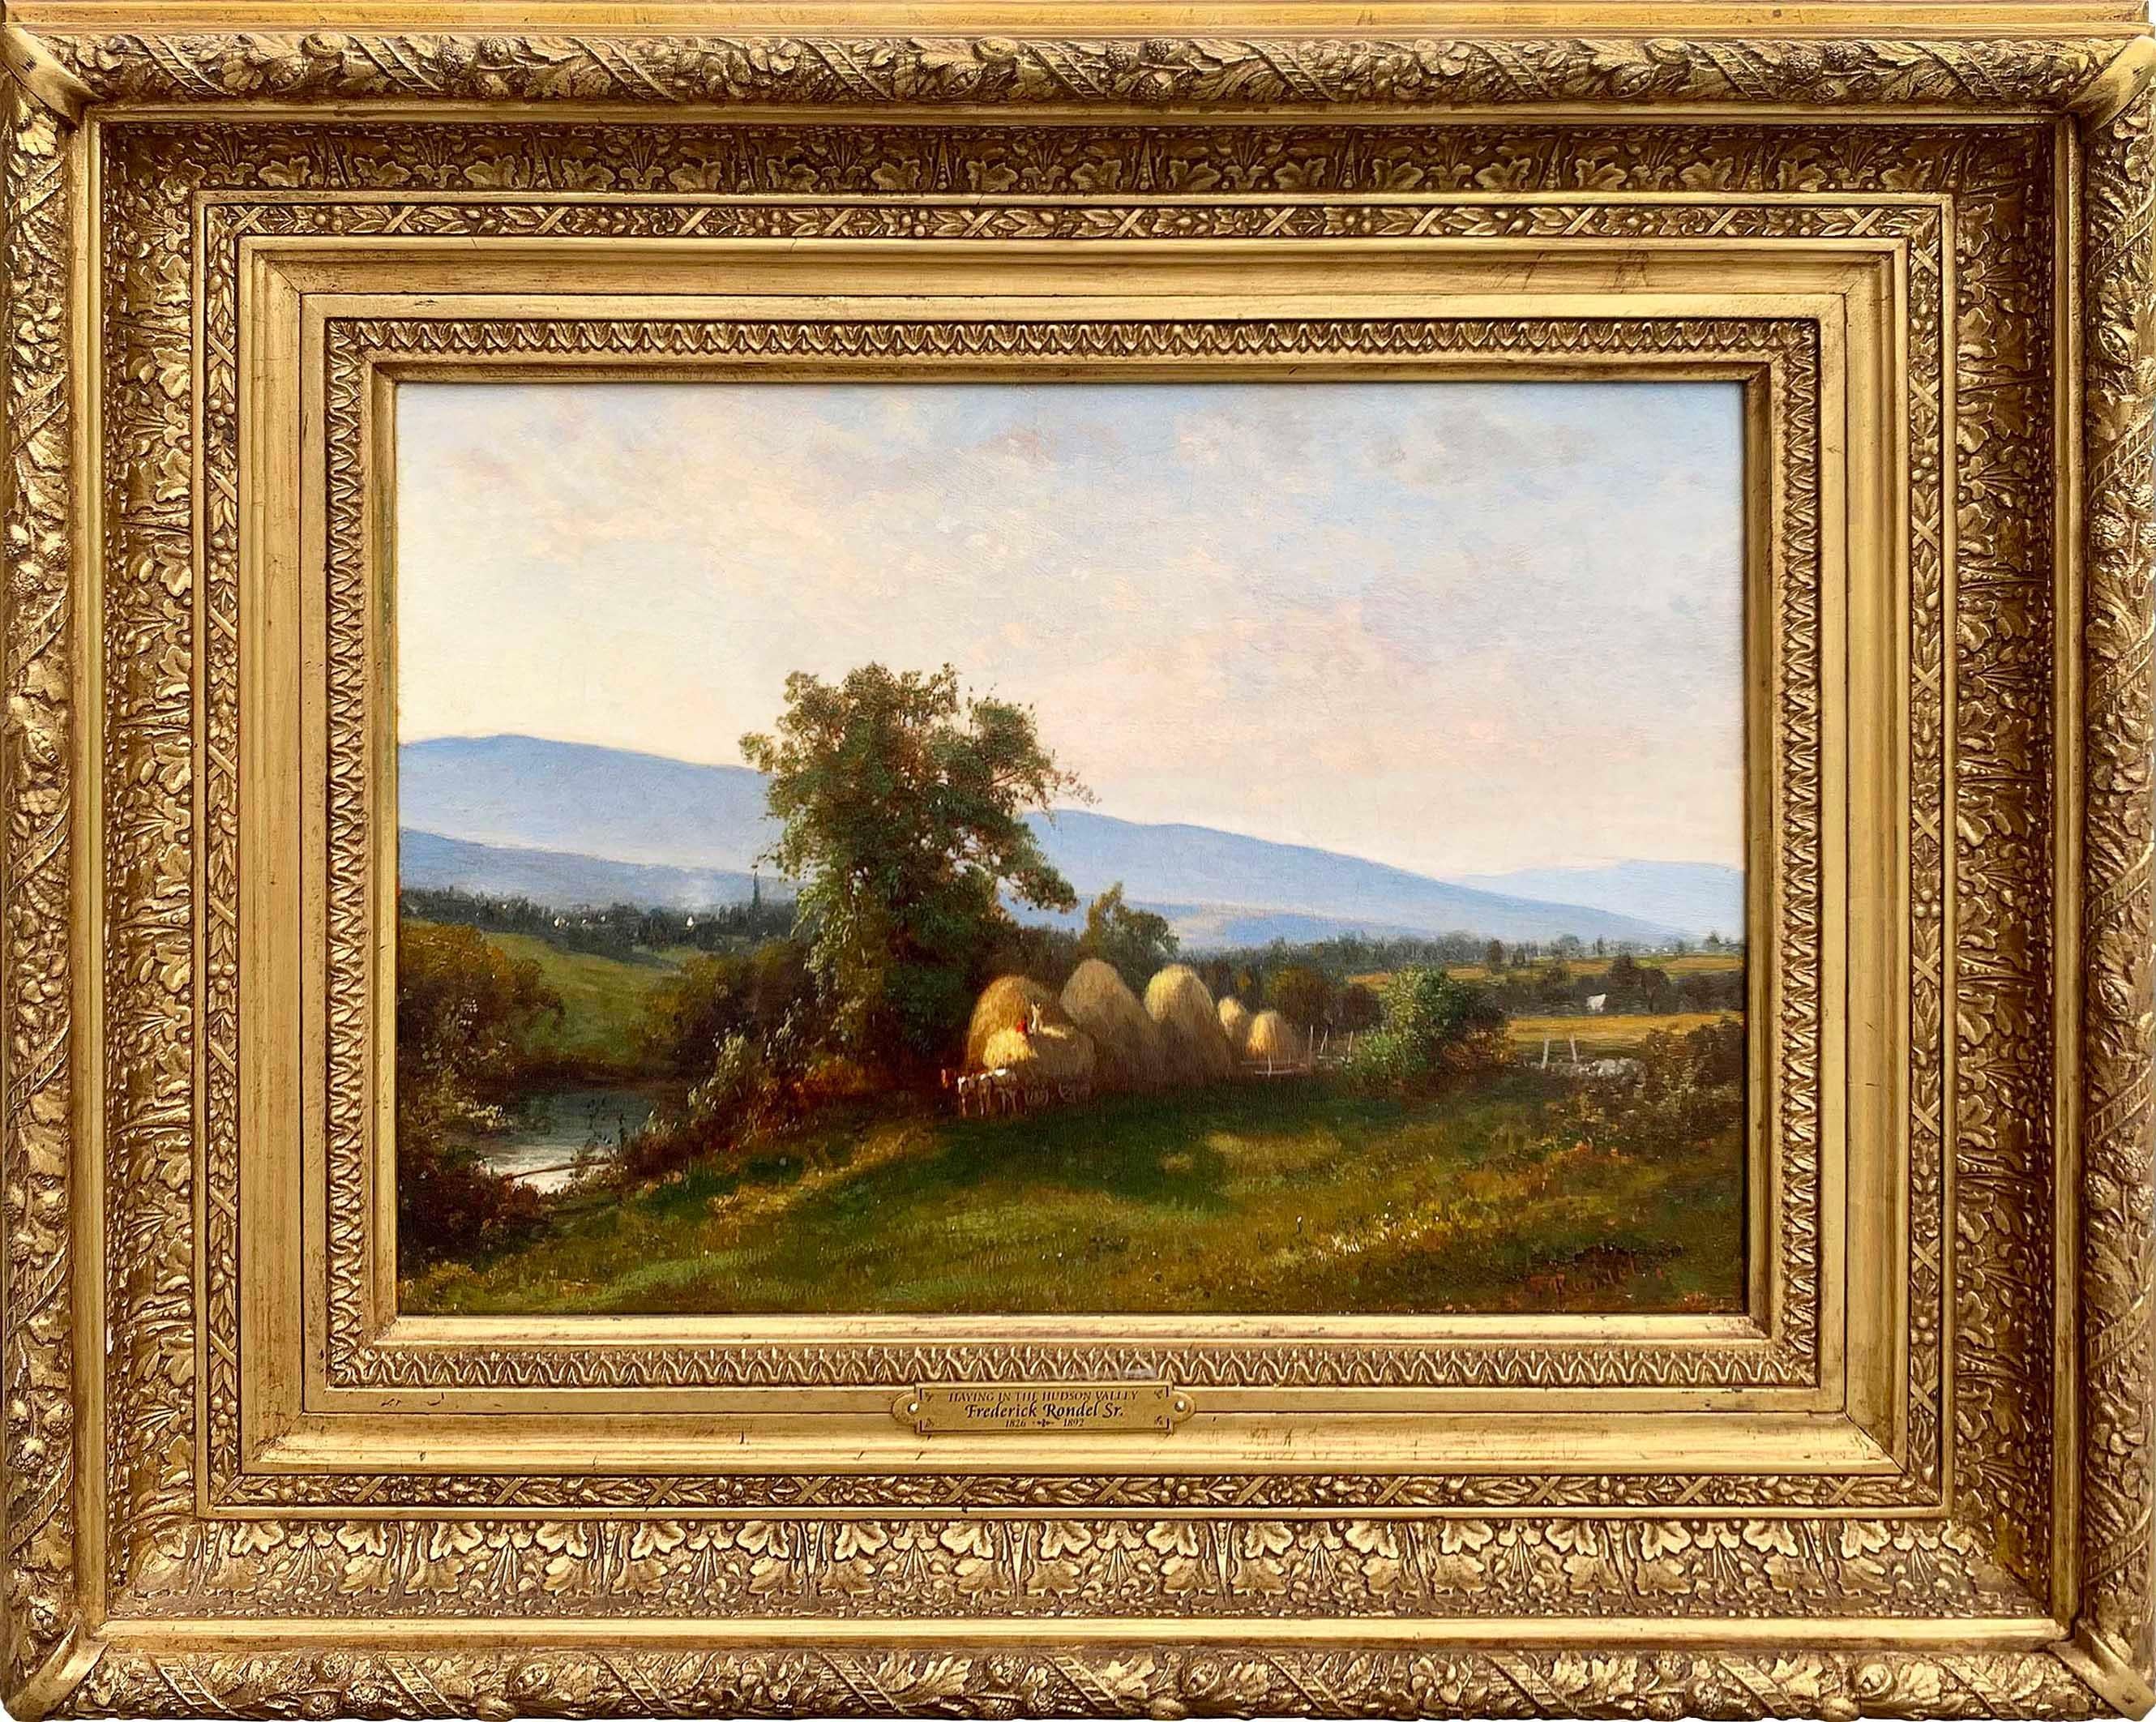 Painted by Hudson River School artist Frederick Rondel, Sr. (1826-1892), "Haying in the Hudson River Valley" is oil on canvas, measures 10.25 x 14 inches, and is signed by Rondel at the lower right. The work is framed in a period appropriate frame